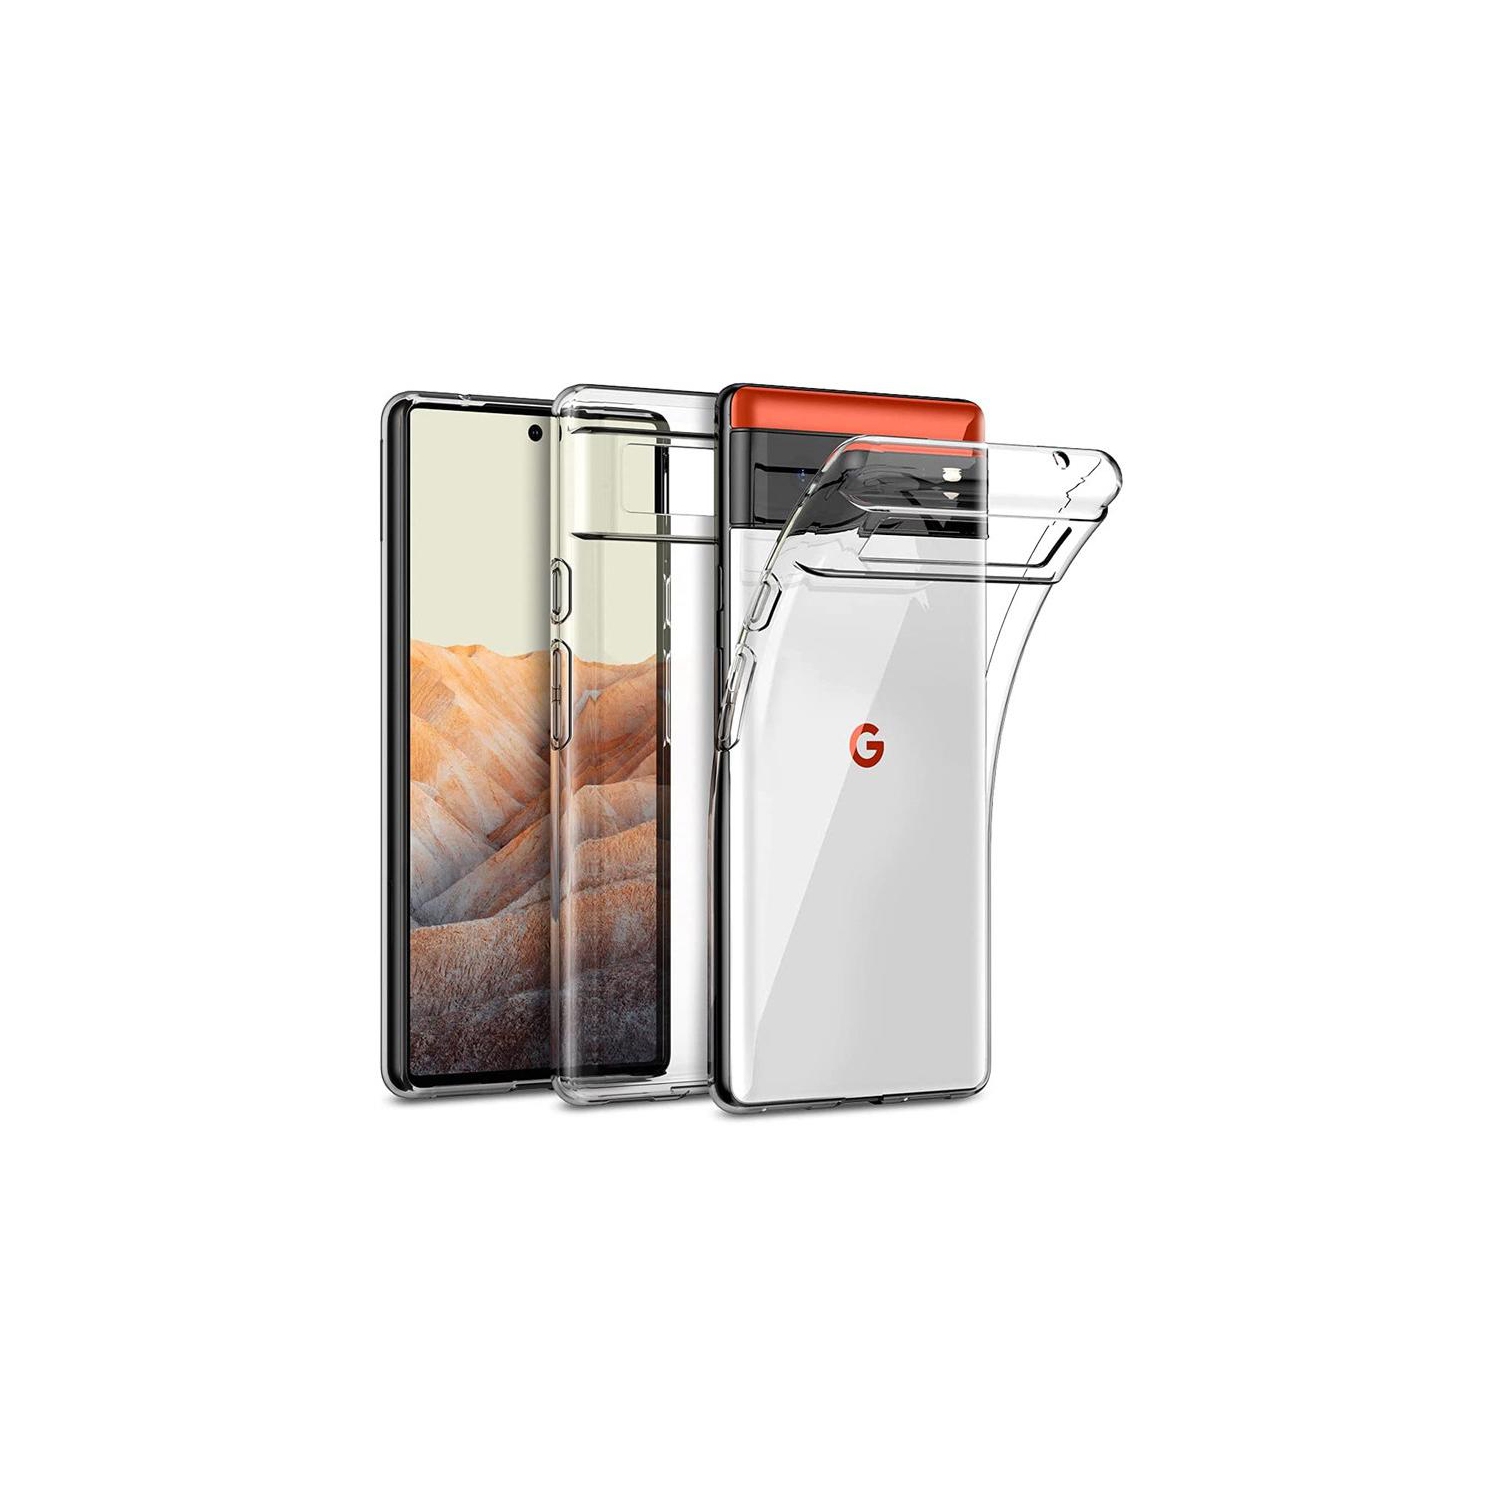 PANDACO Clear Case for Google Pixel 6 Pro